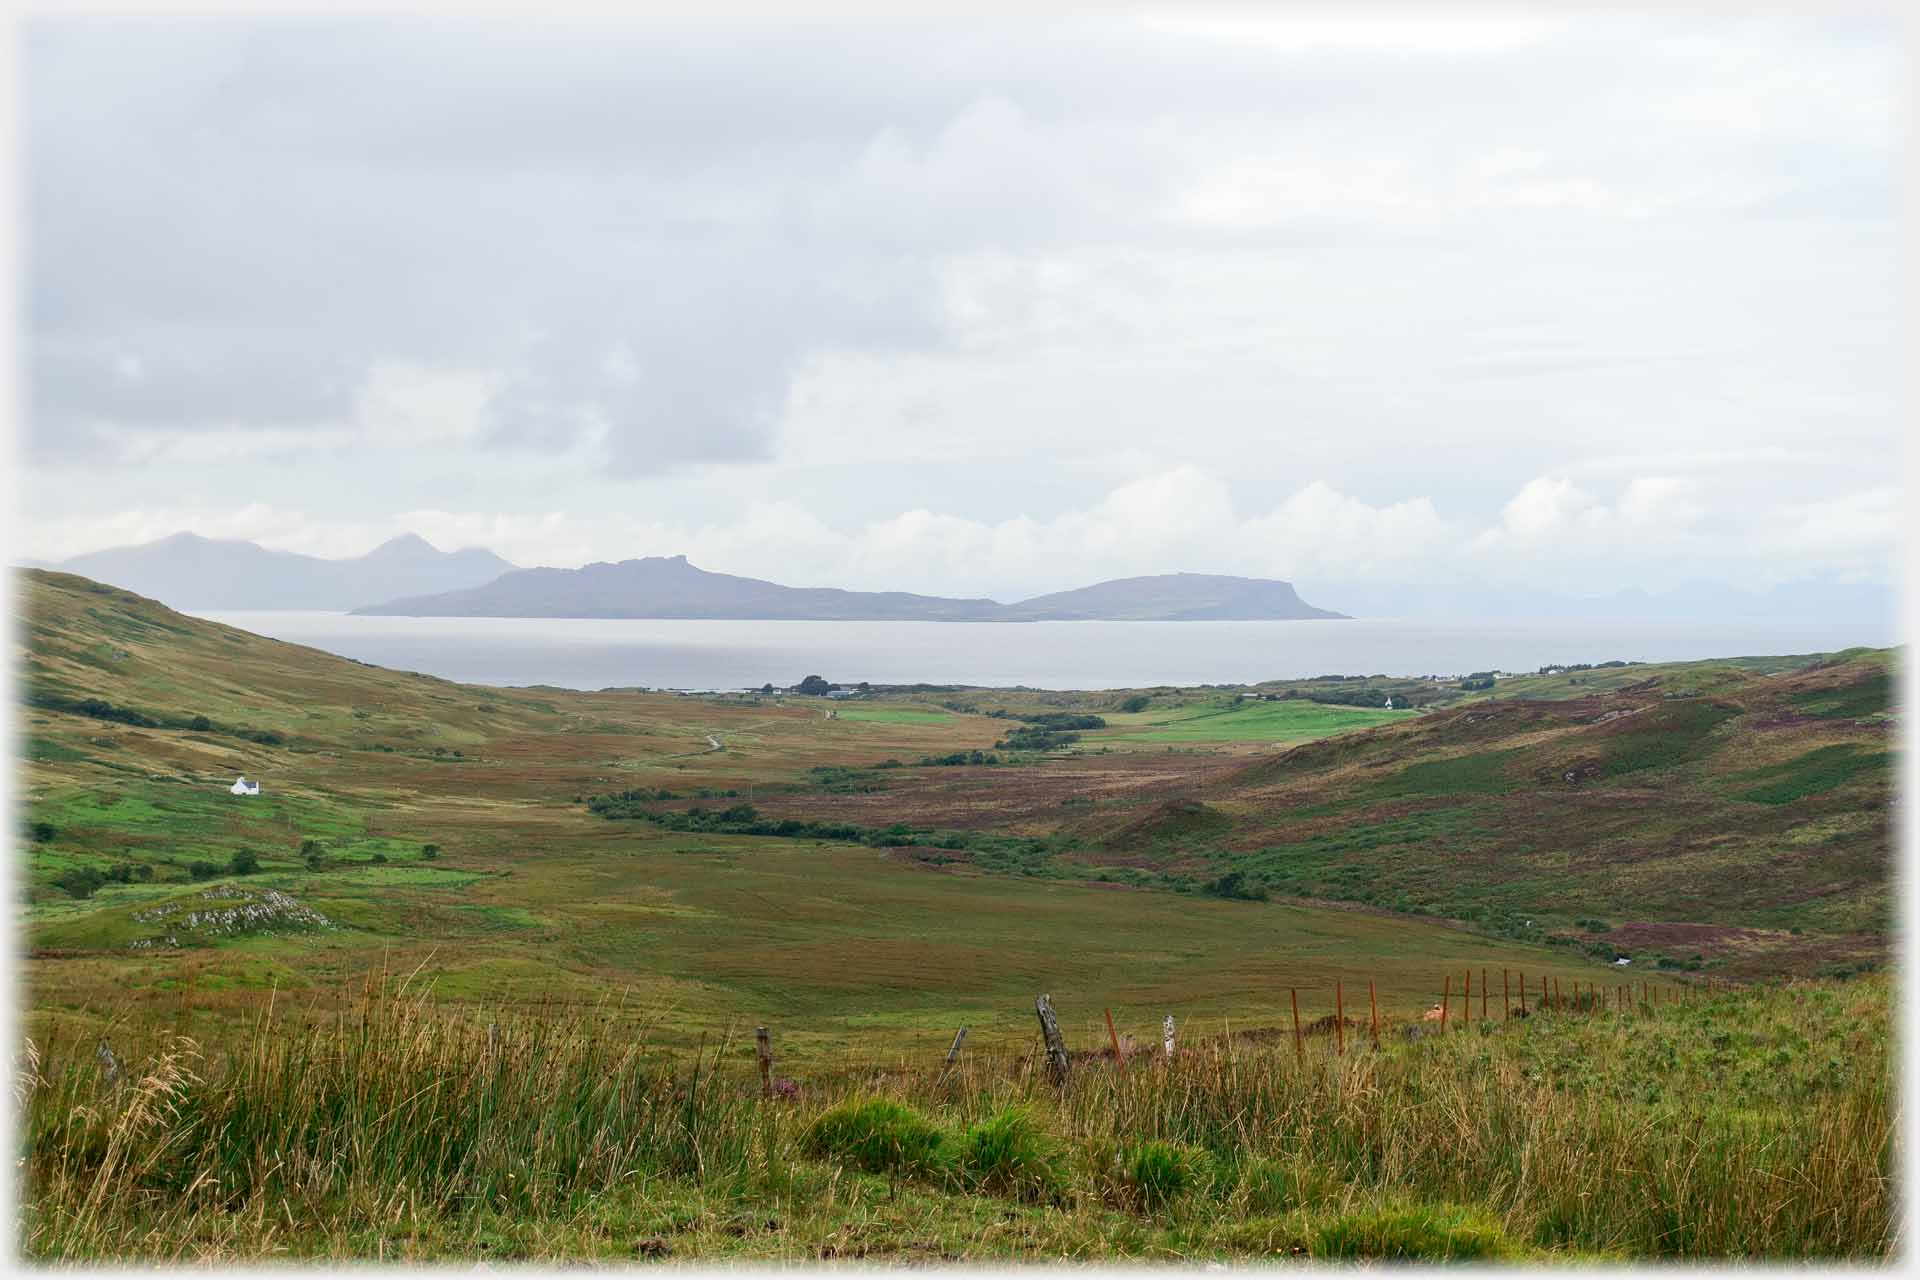 Wide valley opening to sea with islands beyond.